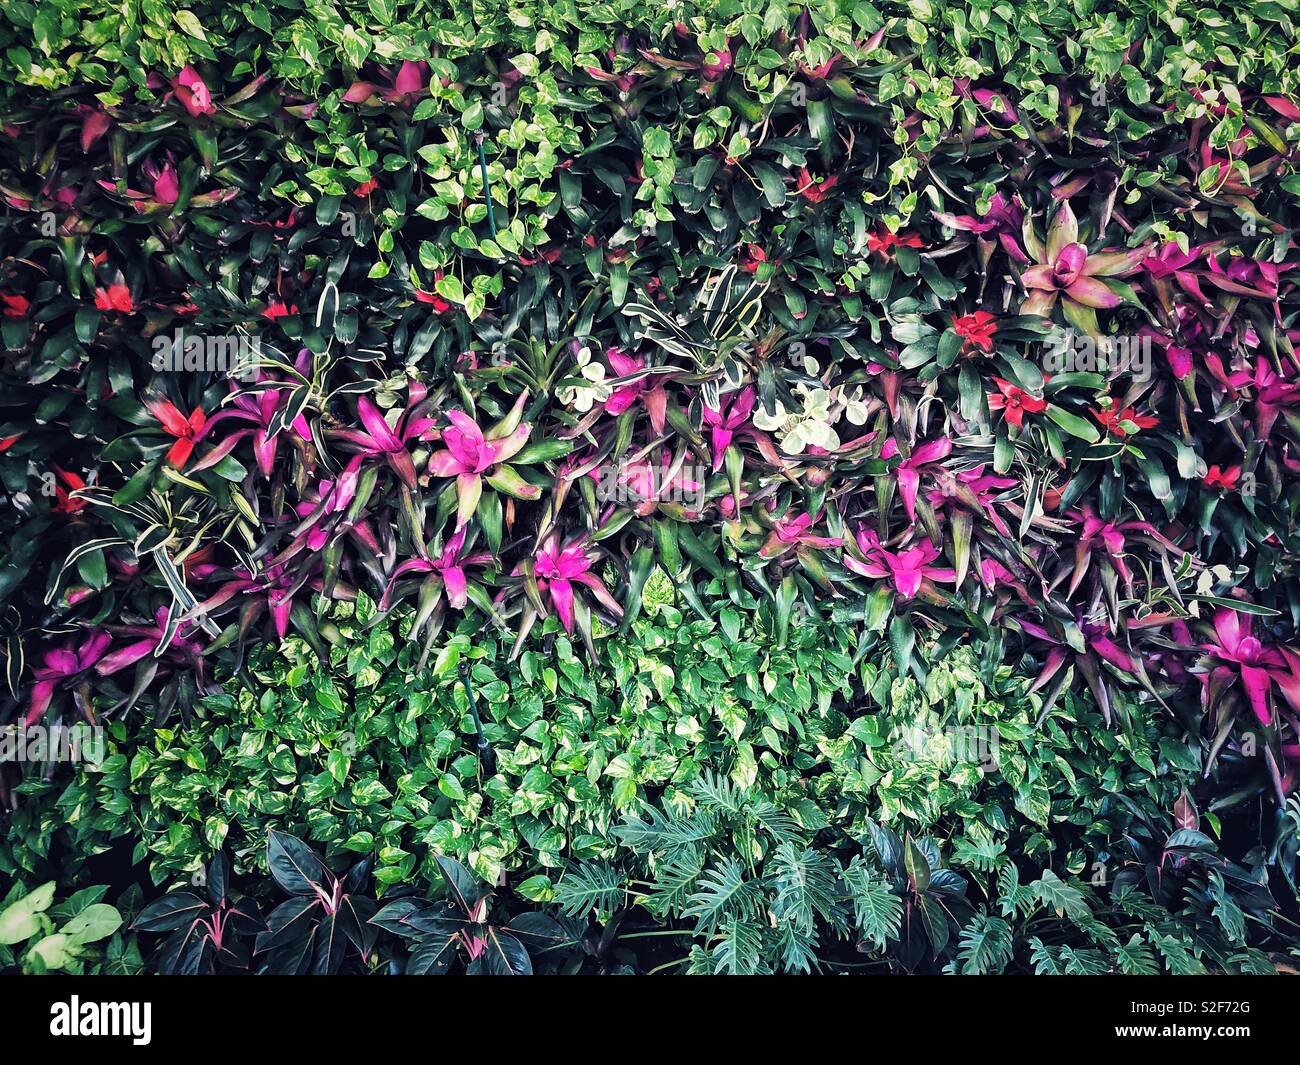 Wall of tropical plants covering Dali museum in Saint Petersburg, Florida Stock Photo